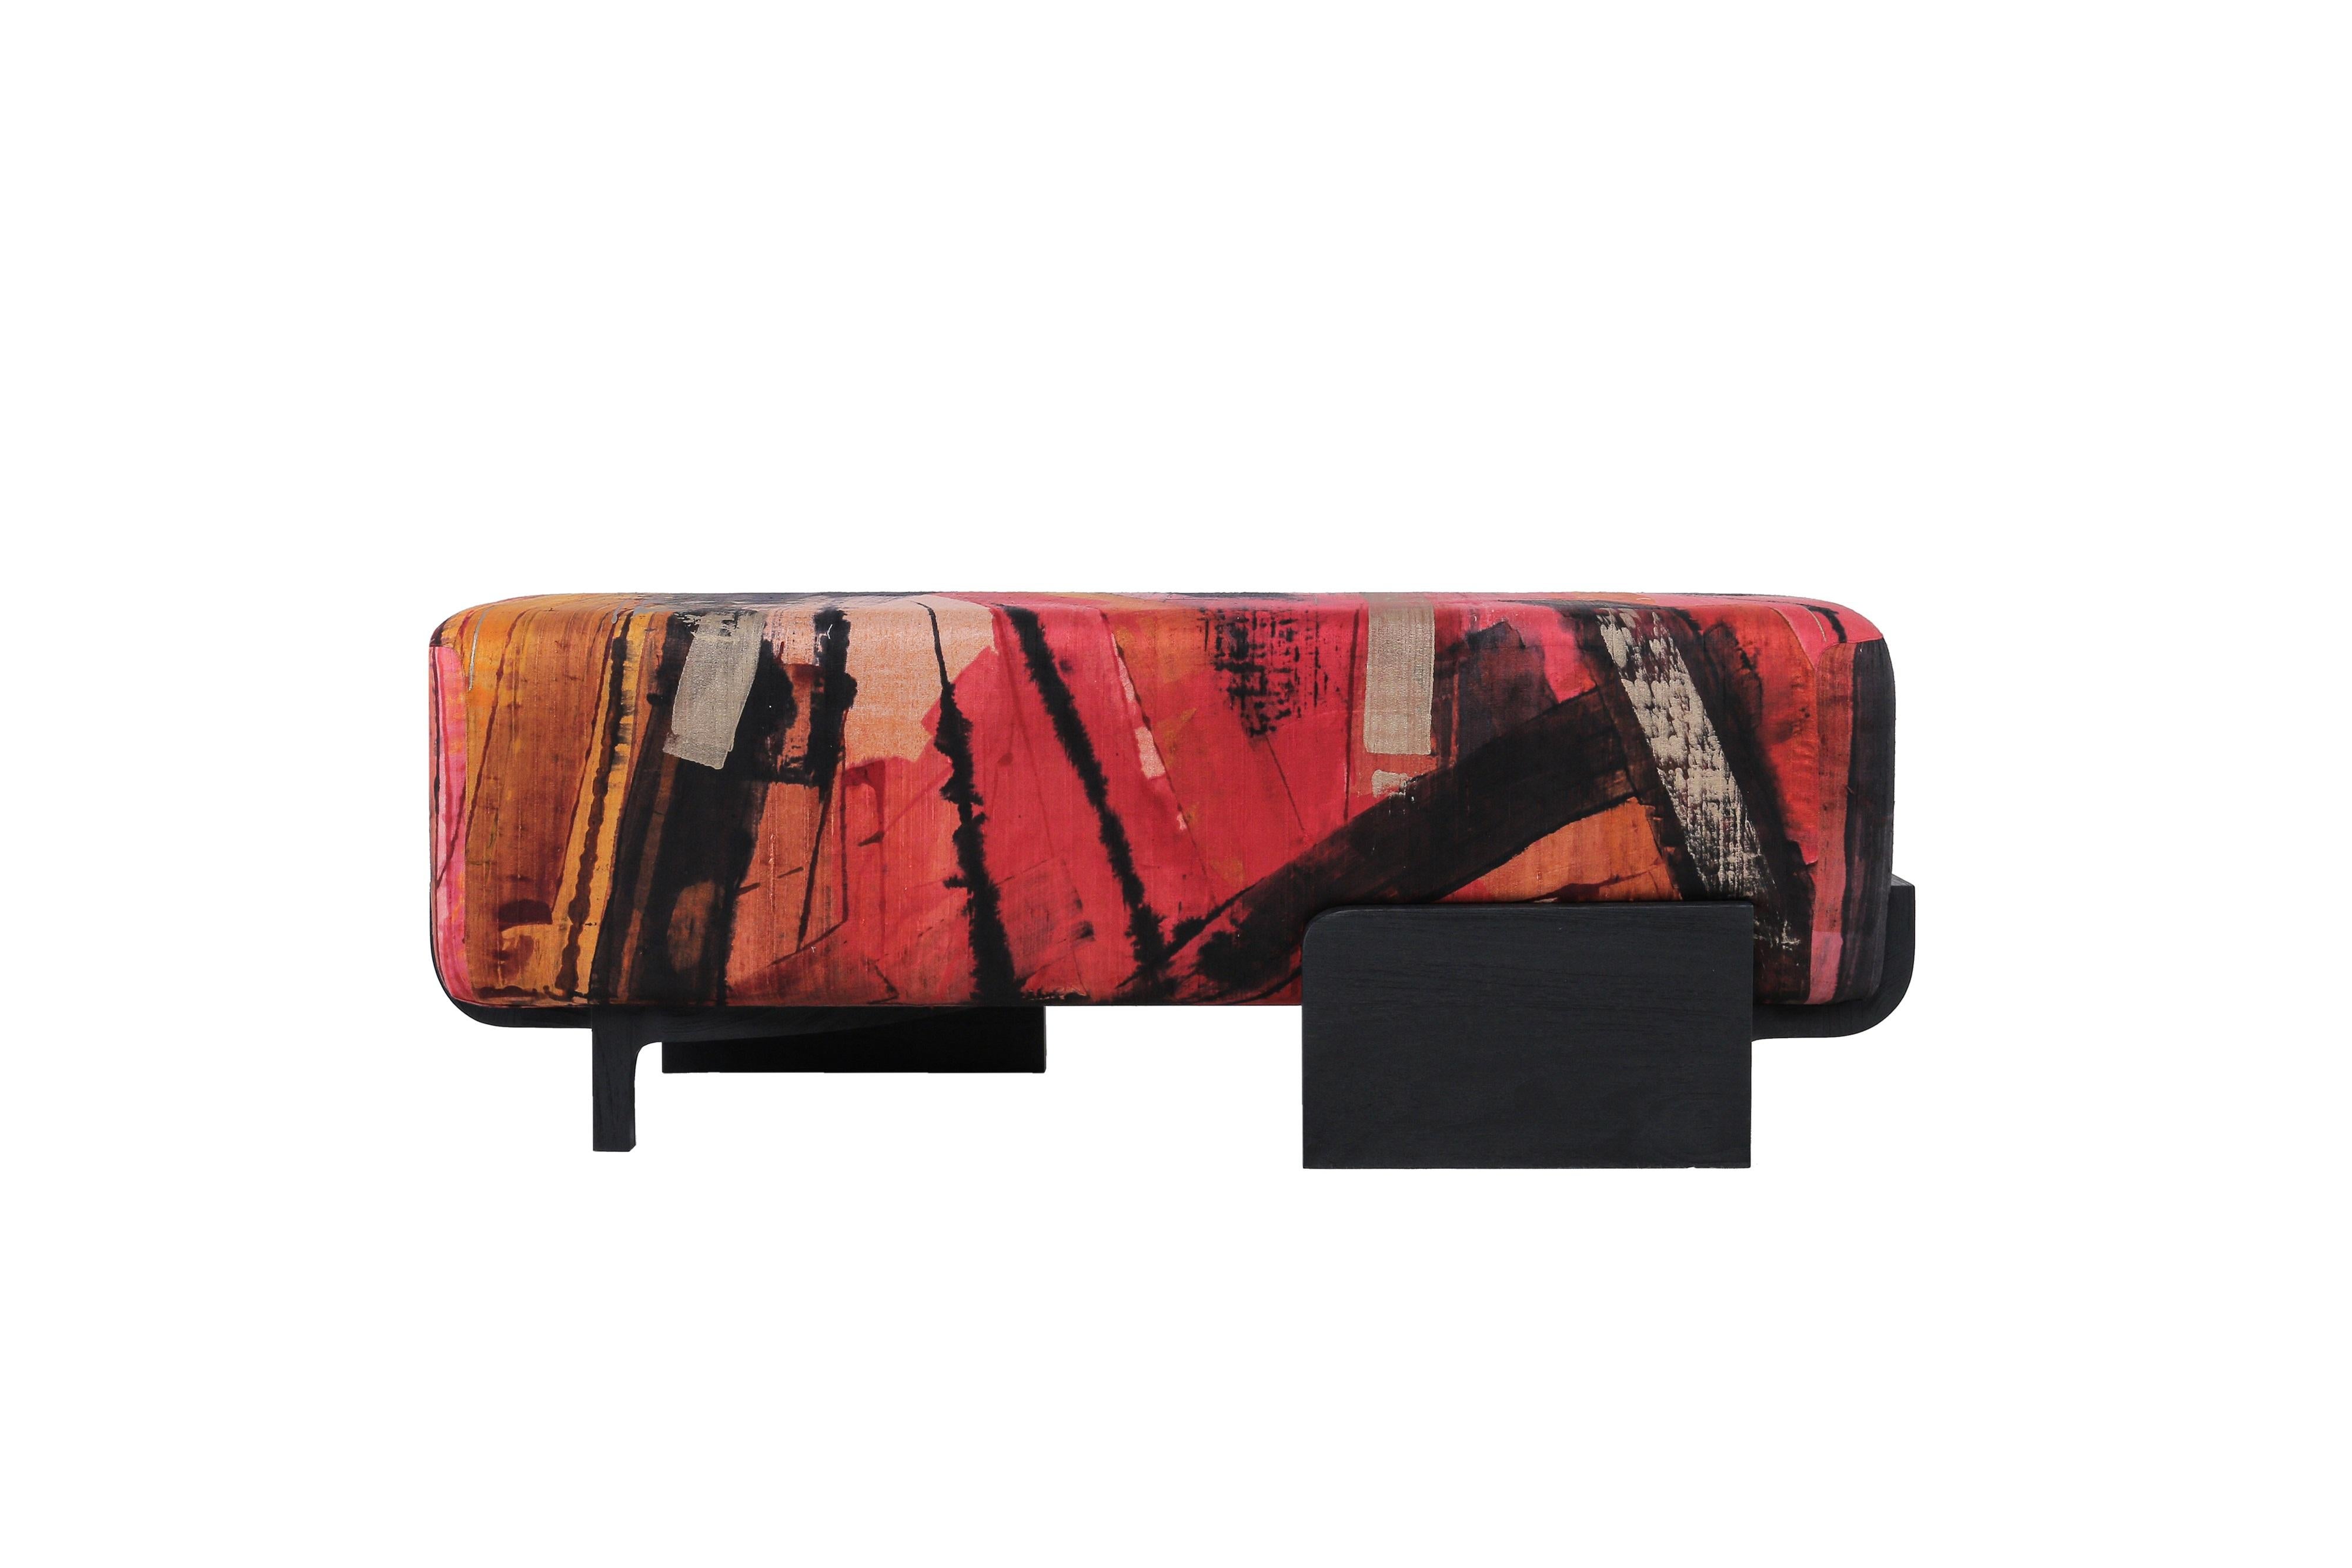 Admani bench by Novocastrian
Dimensions: D 126 x W 45 x H 42 cm
Materials: Solid black javanese teak, Hand loom Silk 
Weight: 60 kg

The vision behind our collaboration with Helena Bajaj Larsen is one of merging and honouring aesthetic and